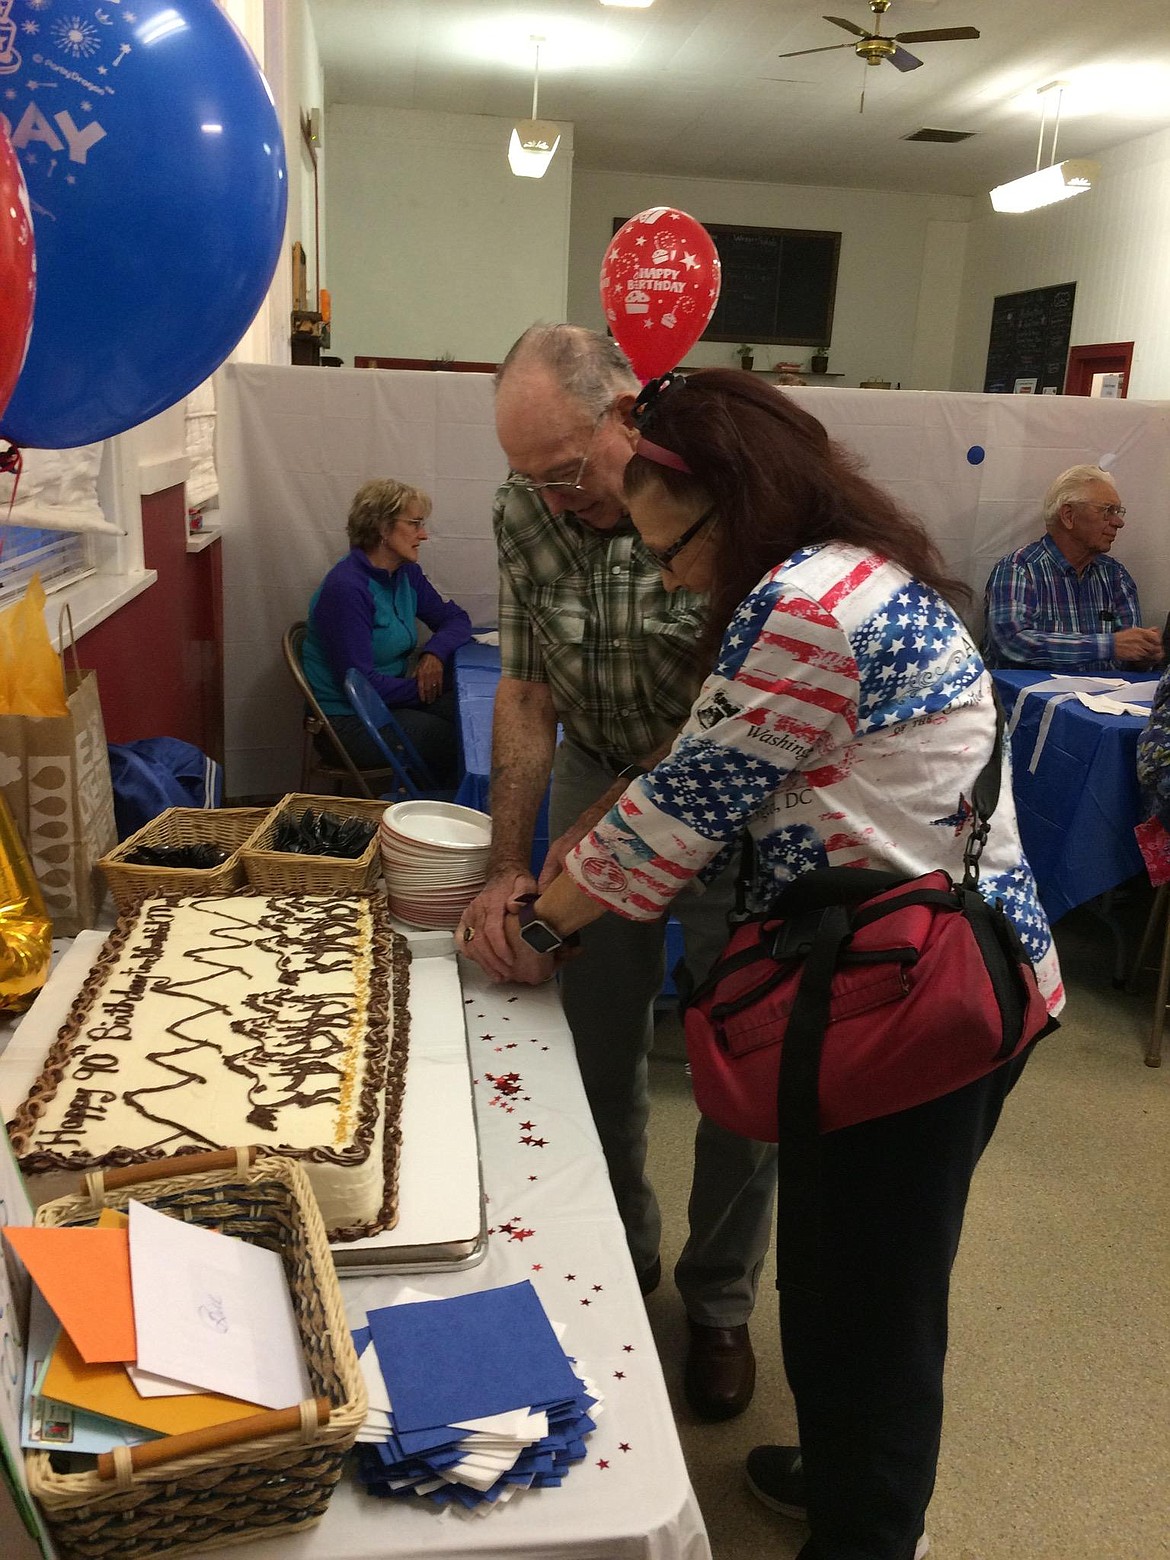 Bill and Joanie Merriman cut the cake to celebrate his 90th birthday on Oct. 5 at Whipped Up! in Superior. (Photo courtesy of Joanie Merriman).